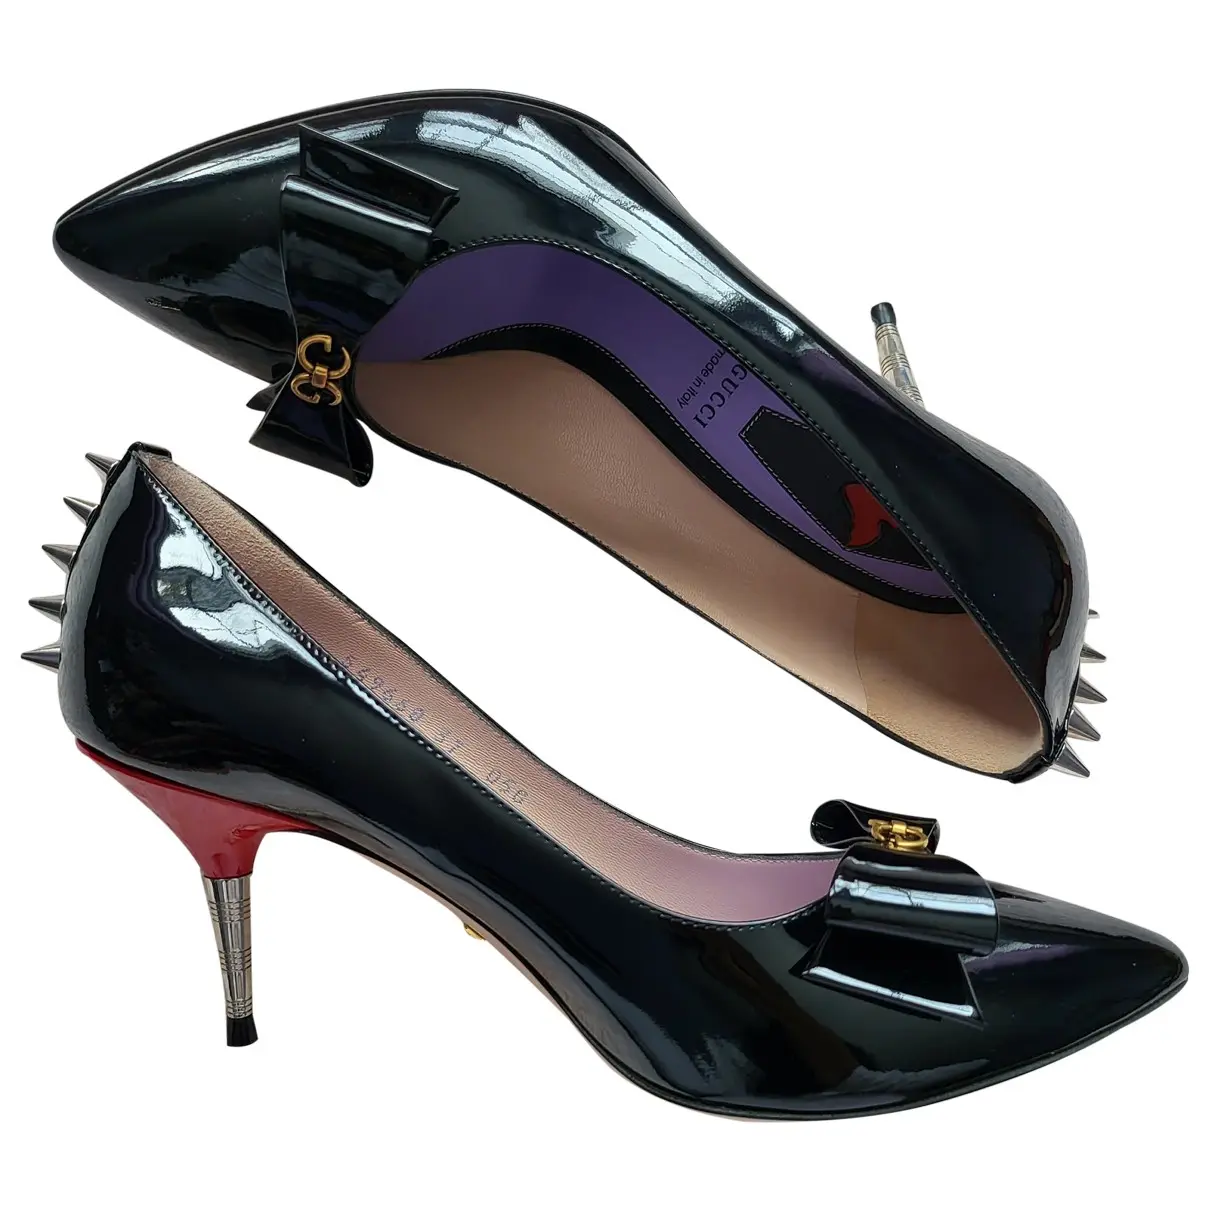 Patent leather heels Gucci